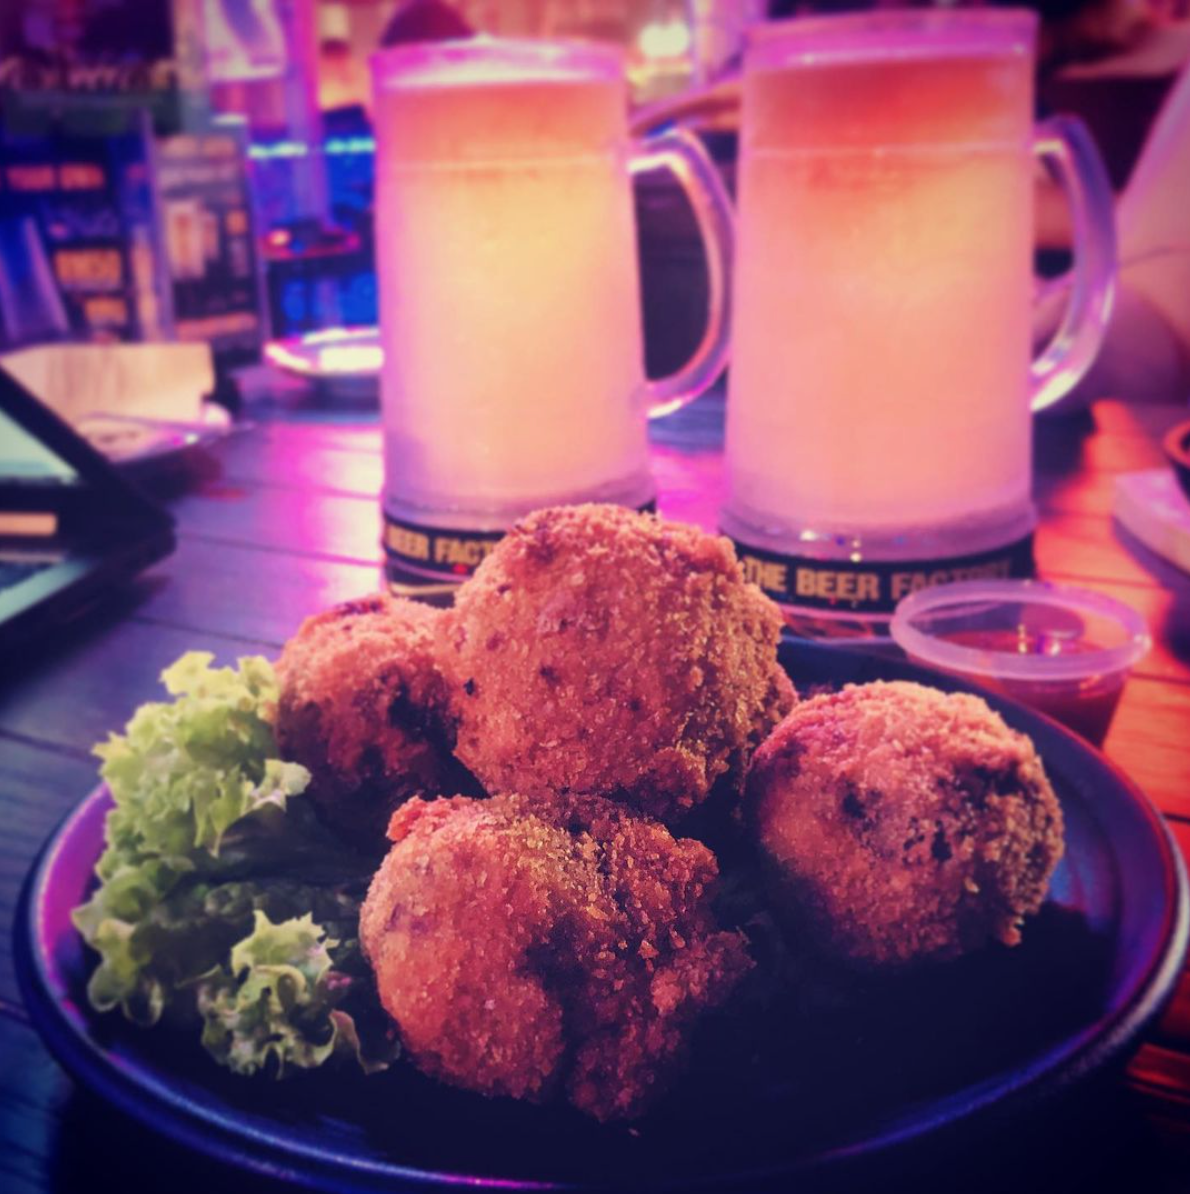 Spicy mutton balls and two pints of beer